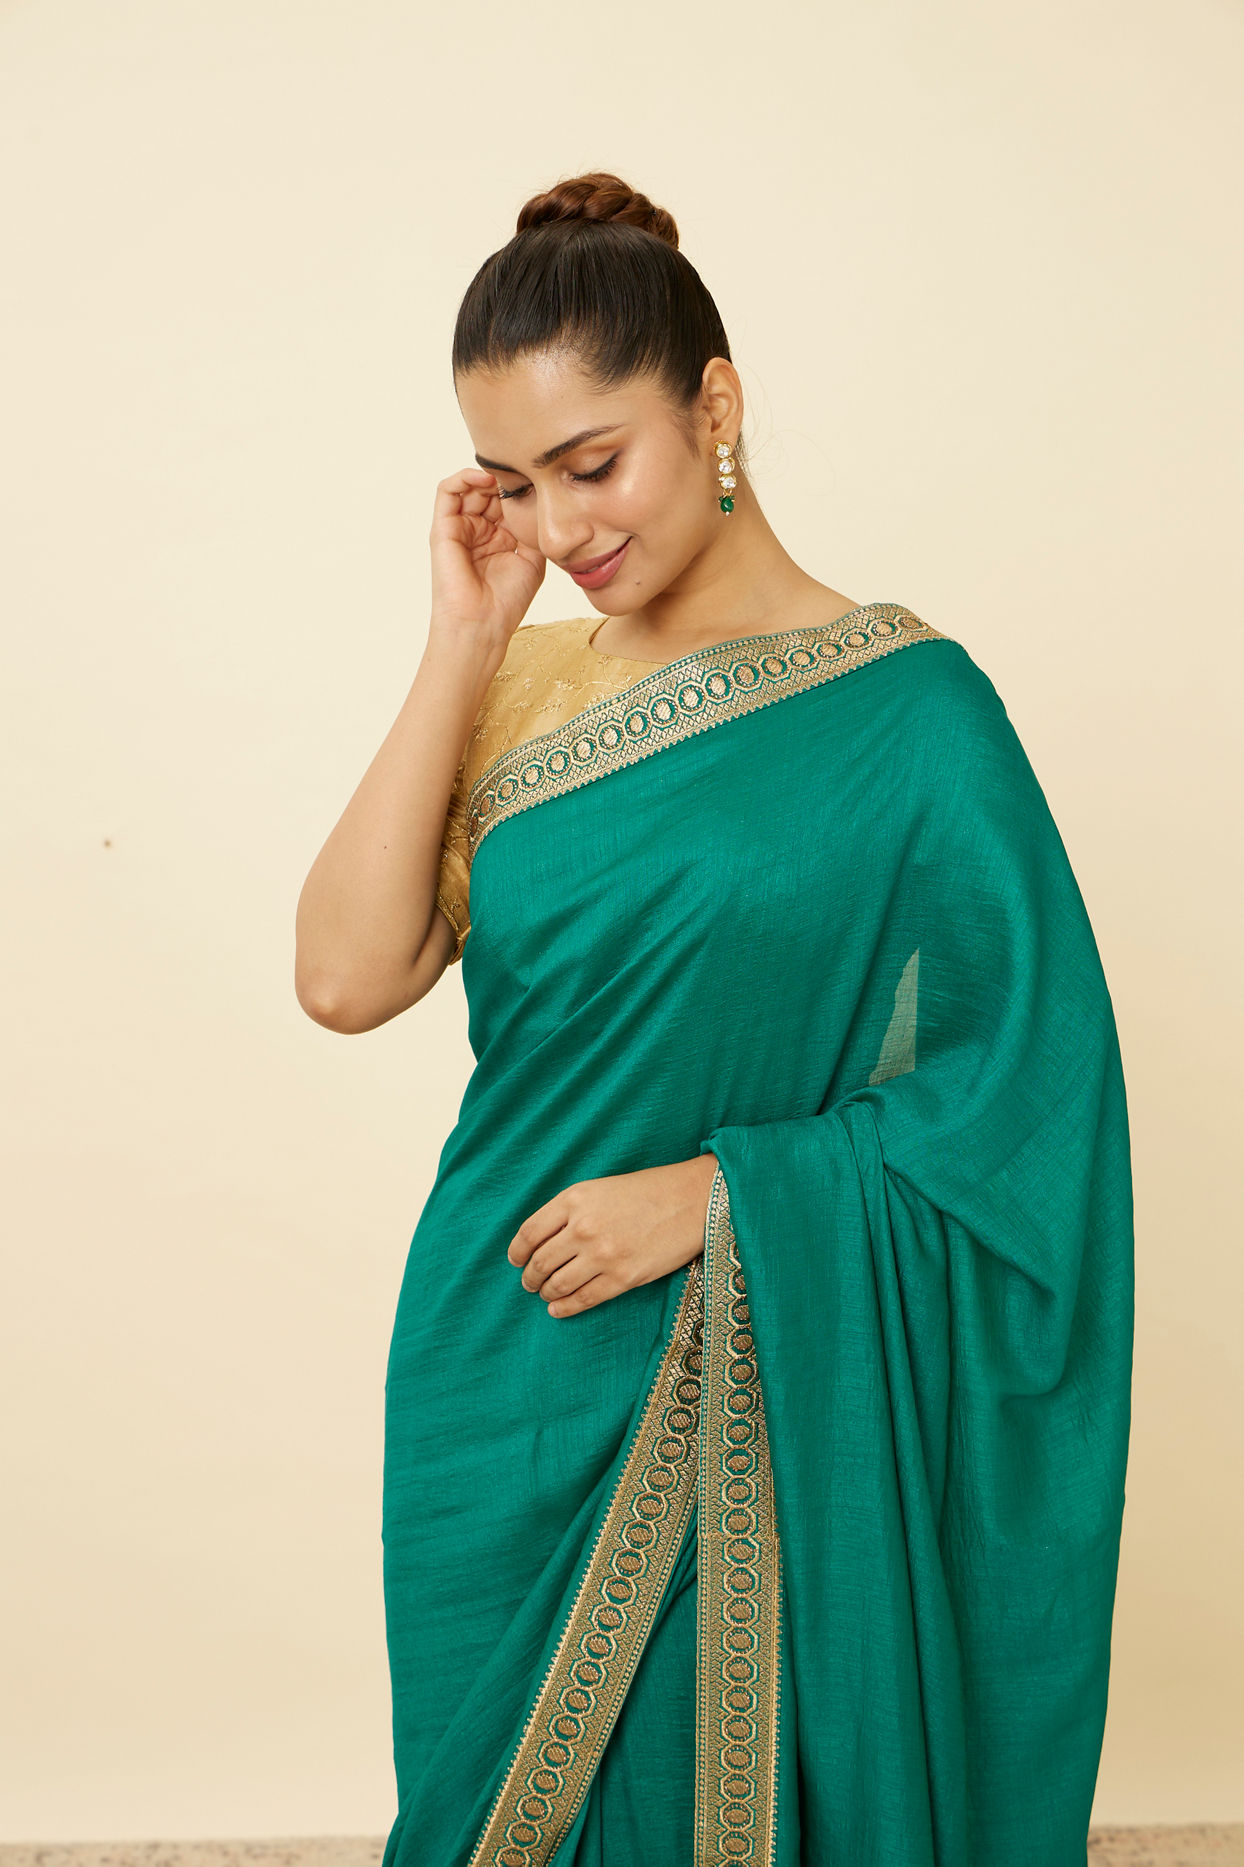 Teal Green Saree with Geometrical Patterned Borders image number 1